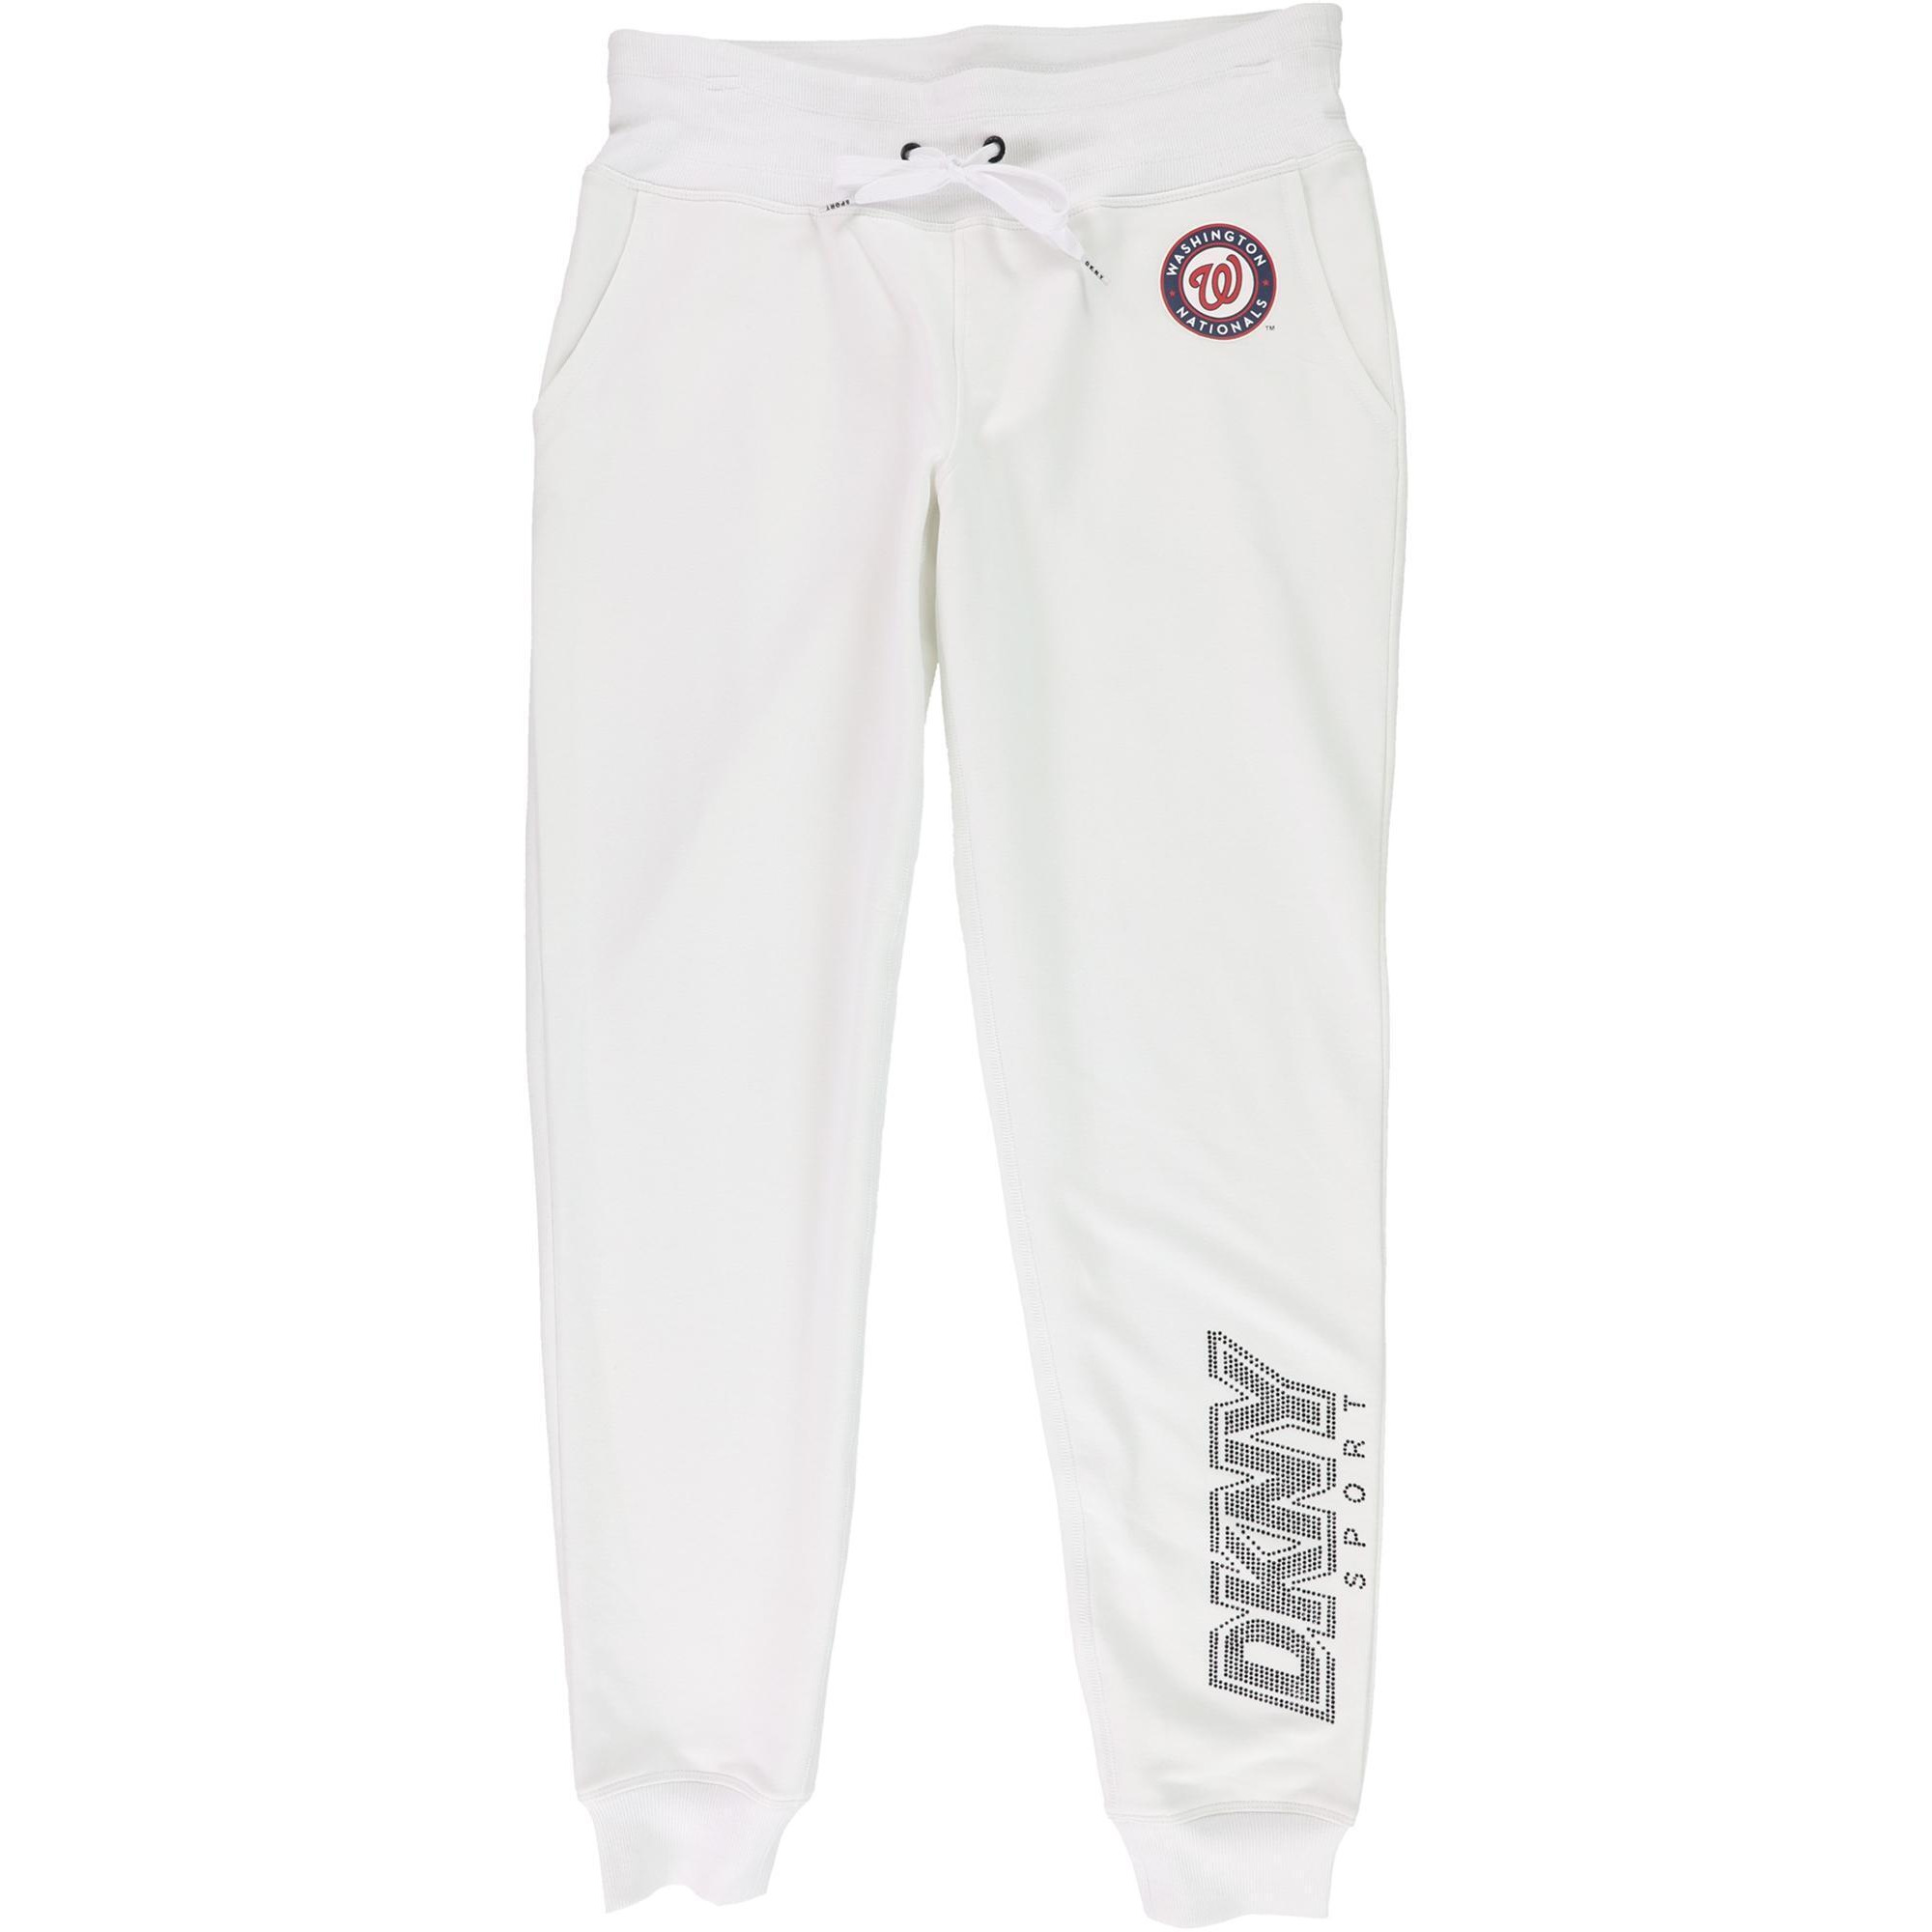 DKNY Womens Washington Nationals Athletic Jogger Pants, Style # DS15Z139